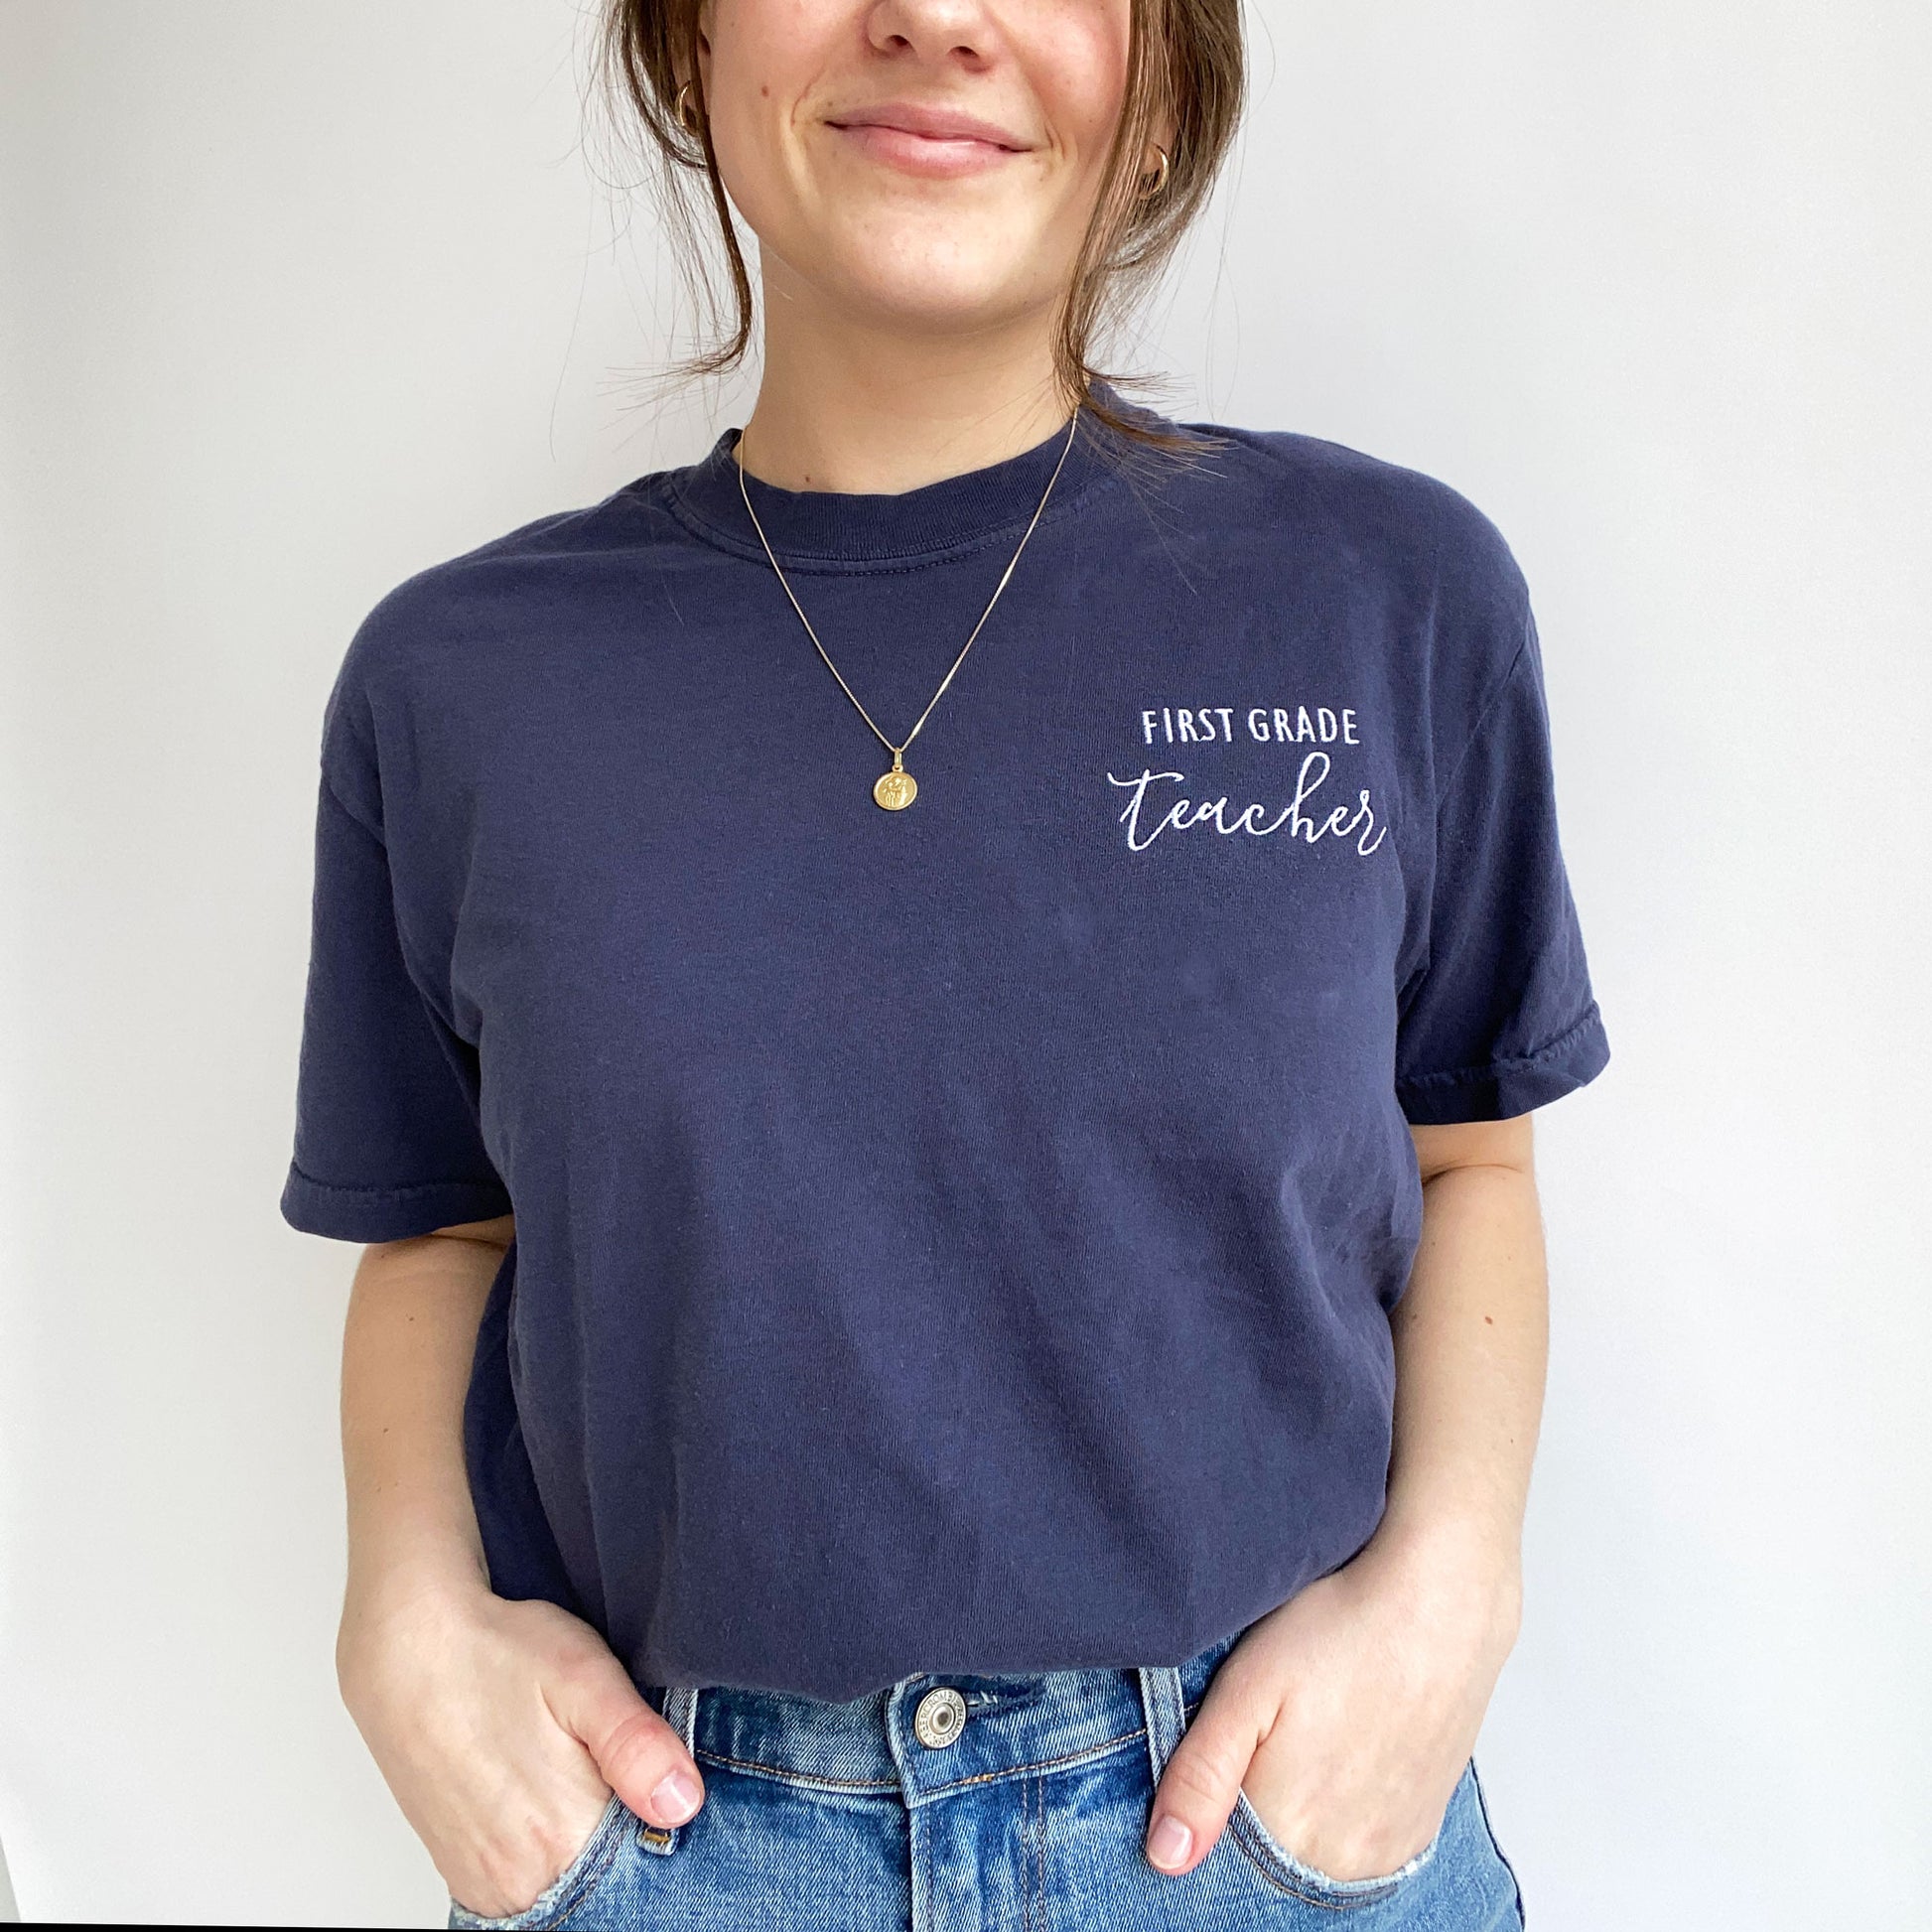 young woman modeling a nay comfort colors t-shirt with embroidered custom grade level and teacher design in white threads on the left chest